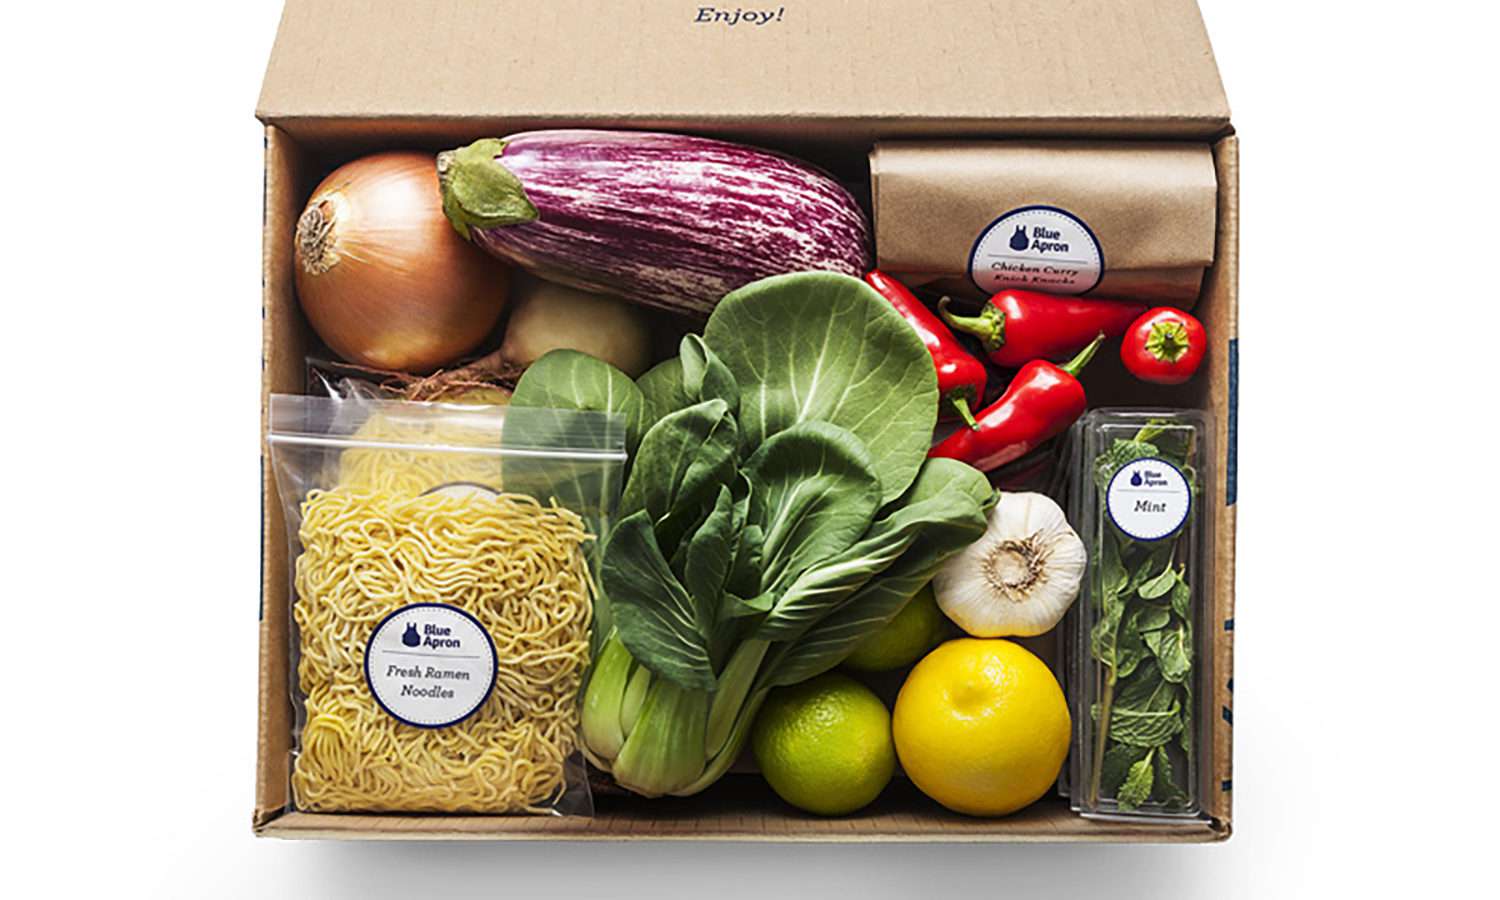 Blue Apron Meal Kit with vegetables and pasta